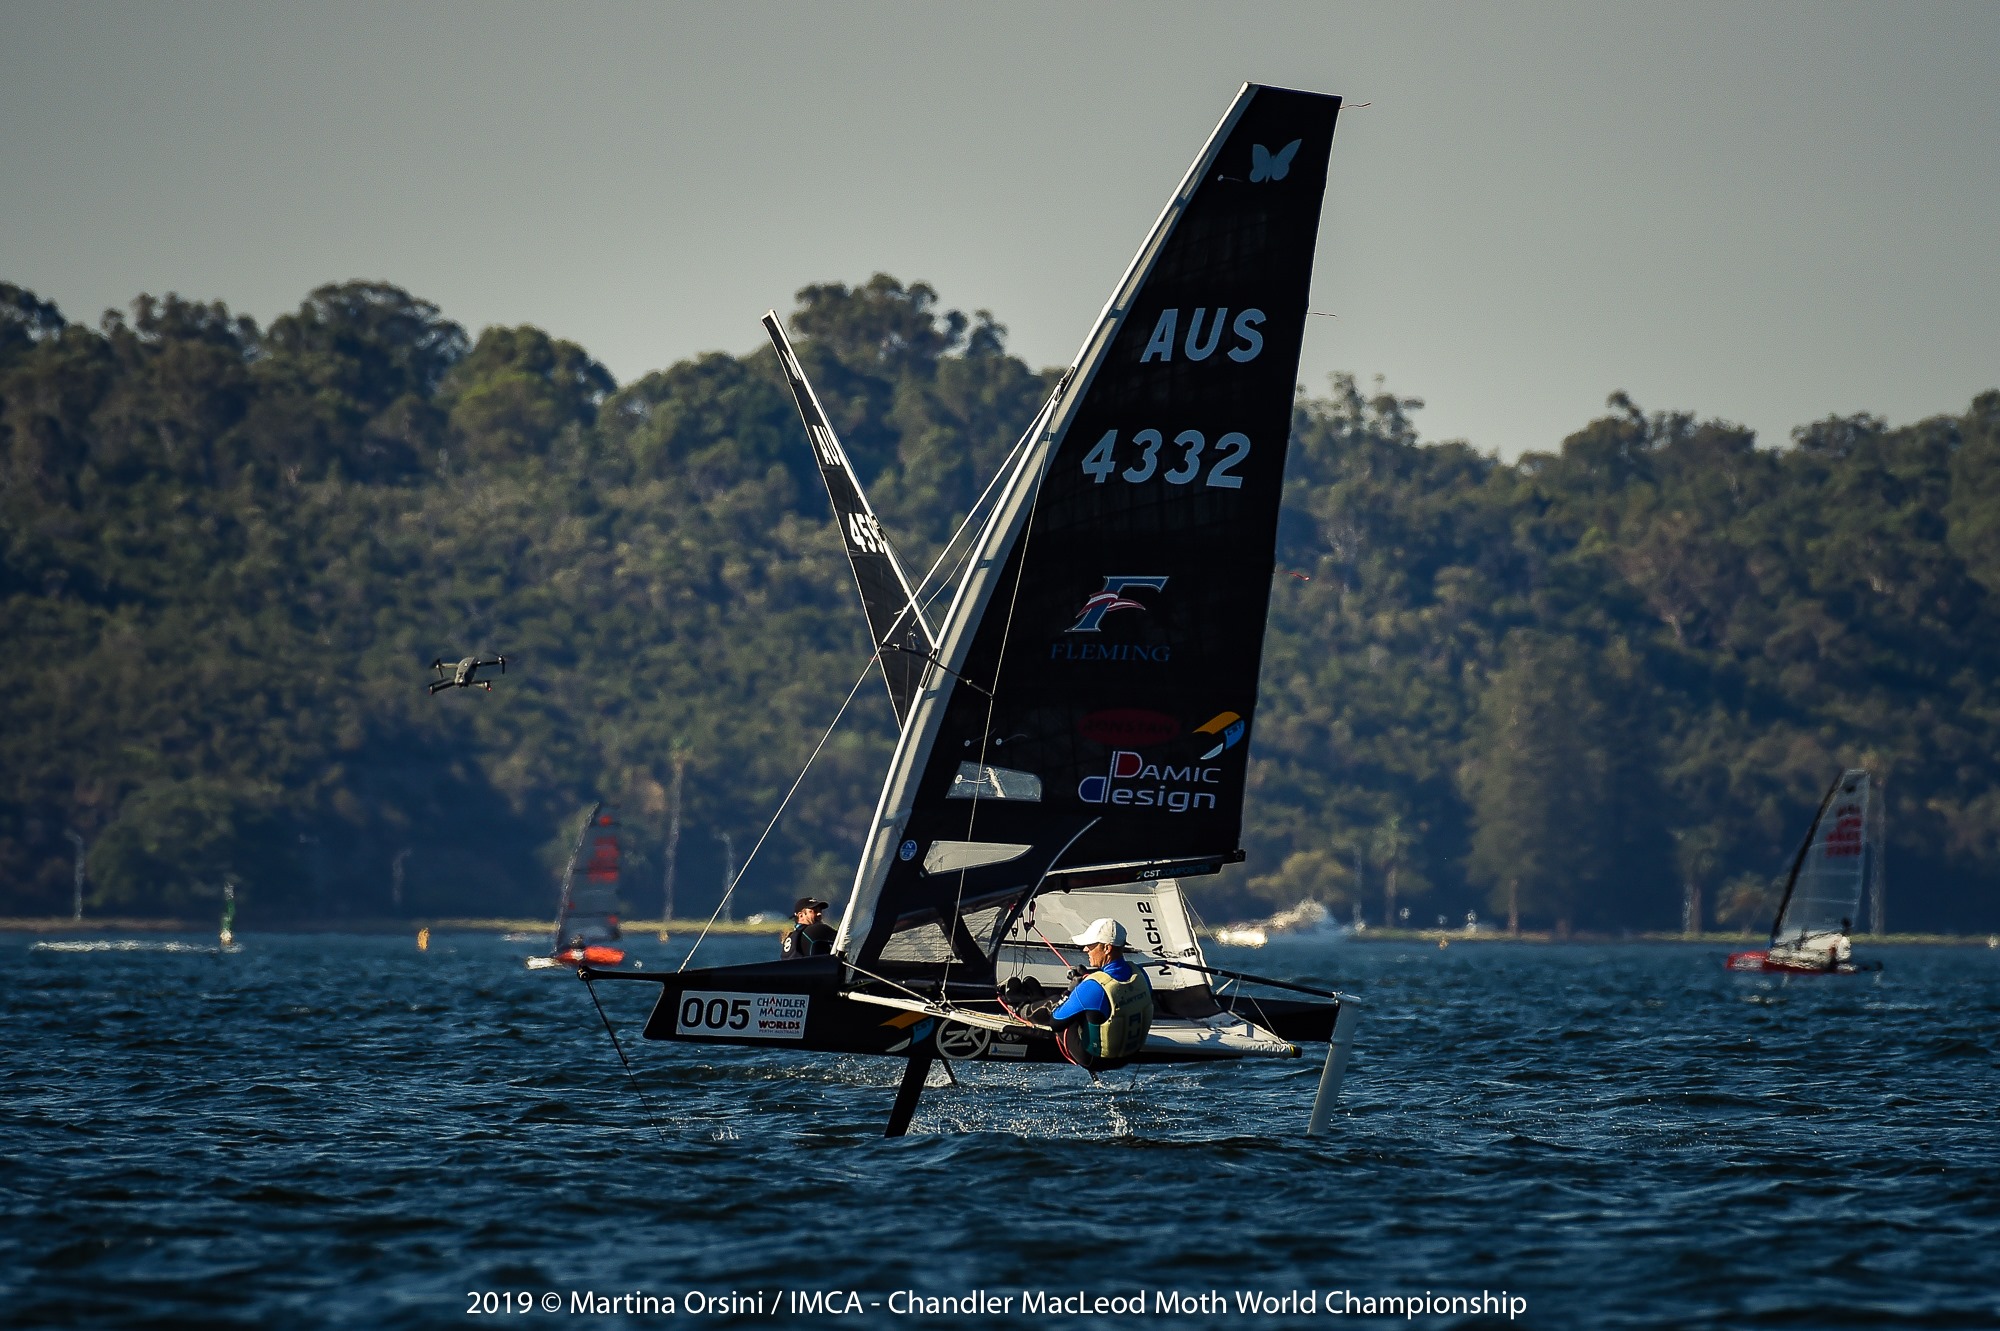  Moth  World Championship 2019  Perth AUS  Day 4, first Final races today with Funk and Kirby USA